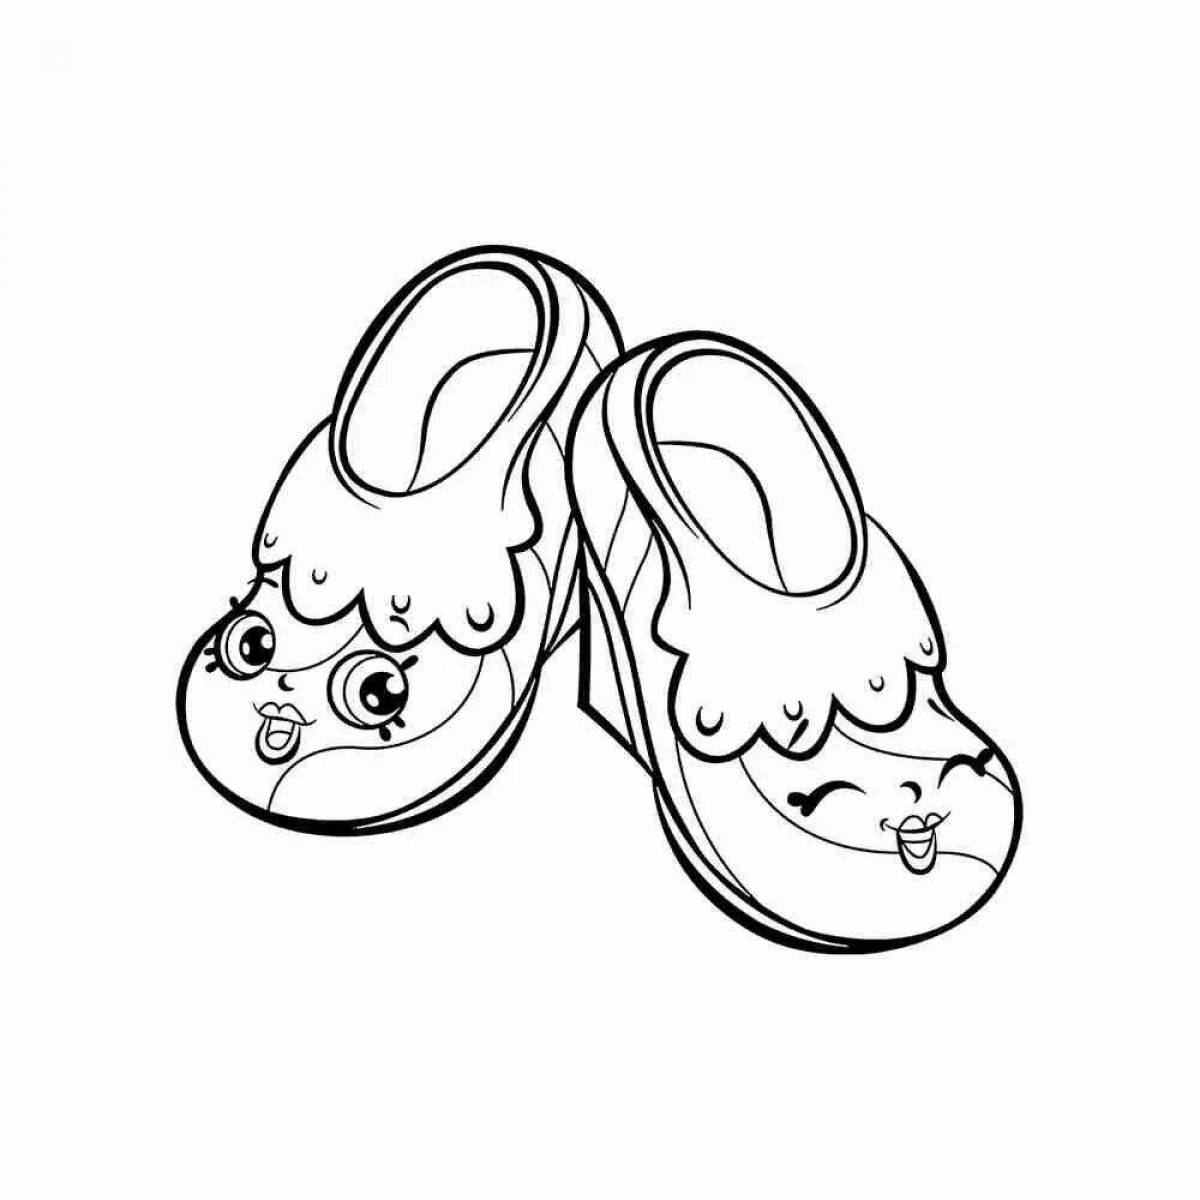 A fun shoe coloring book for kids